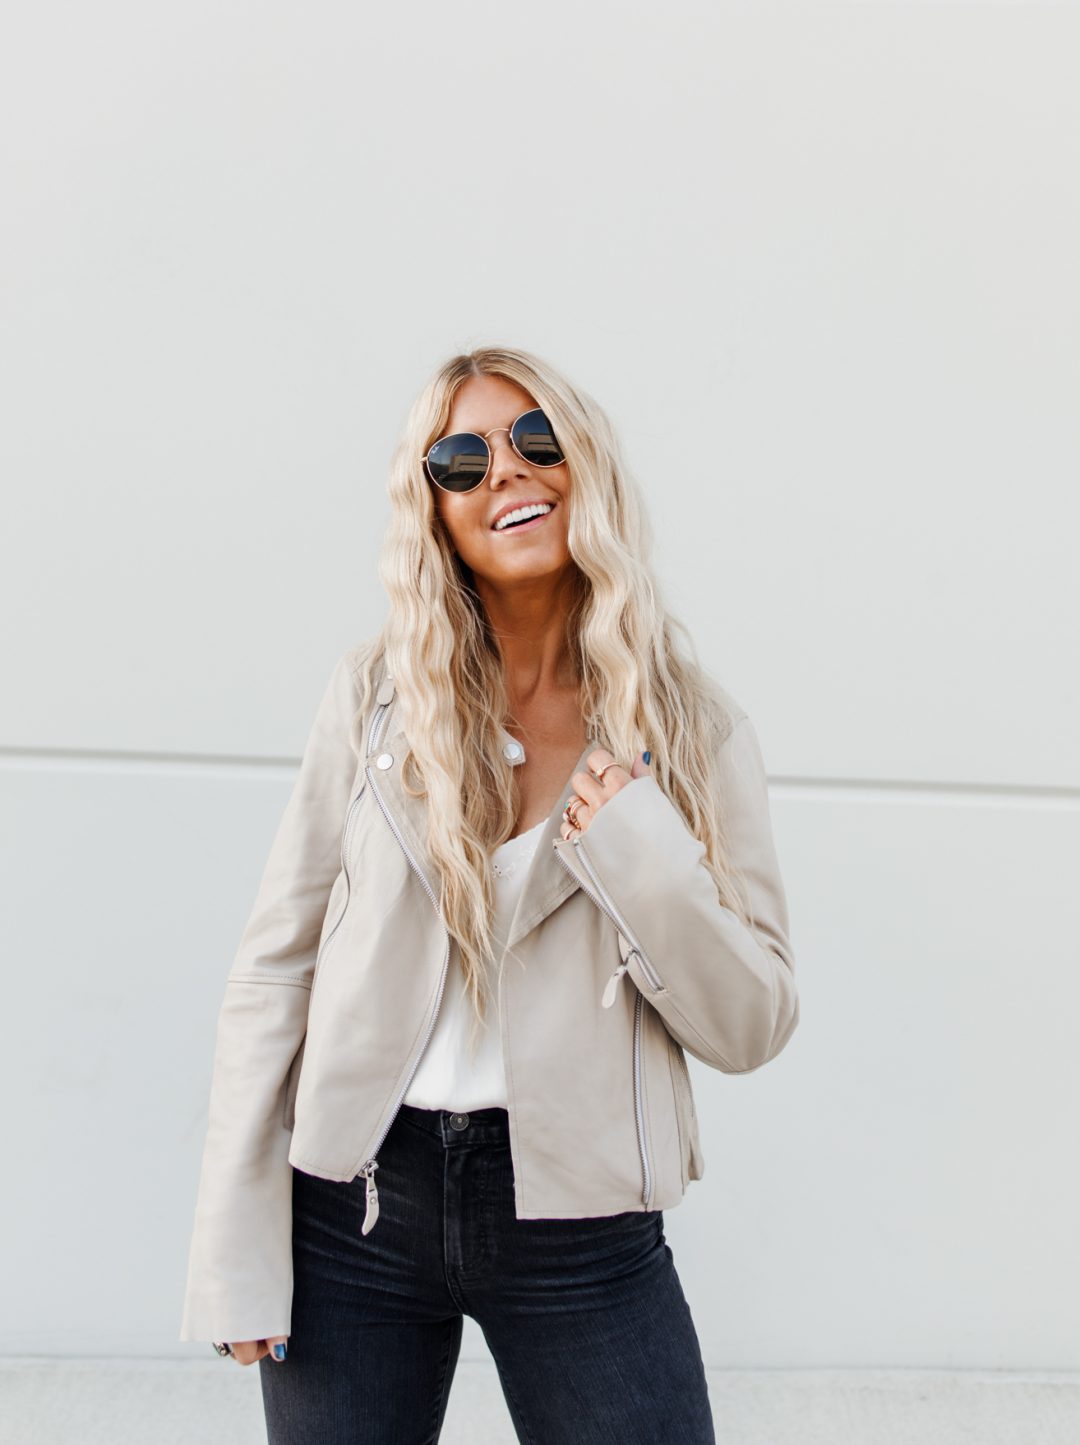 PAIGE for Fall | Fashionable Fall Finds | Denim, Blouses, Jackets + More